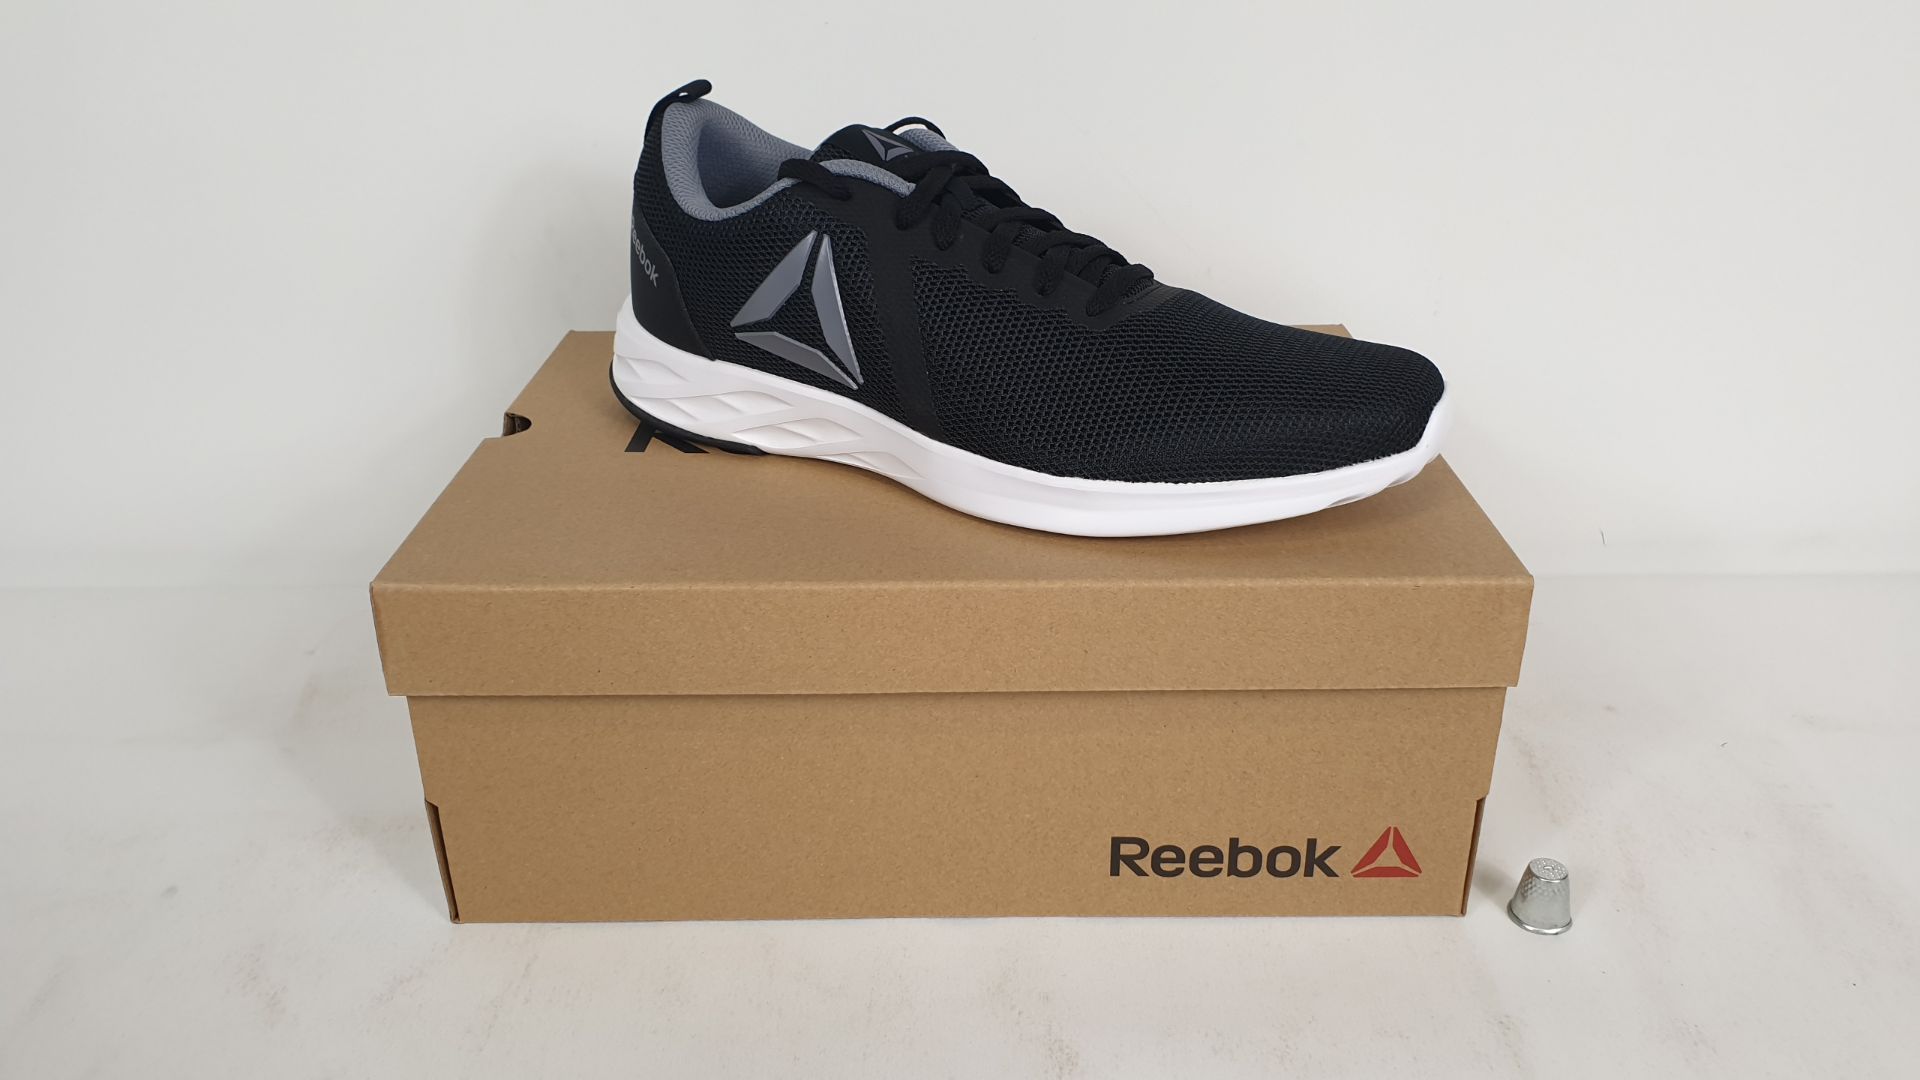 6 X PAIRS OF REEBOK TRAINERS ASTRO RIDE ESSENTIAL BLACK/ WHITE SIZE 10 - BRAND NEW AND BOXED